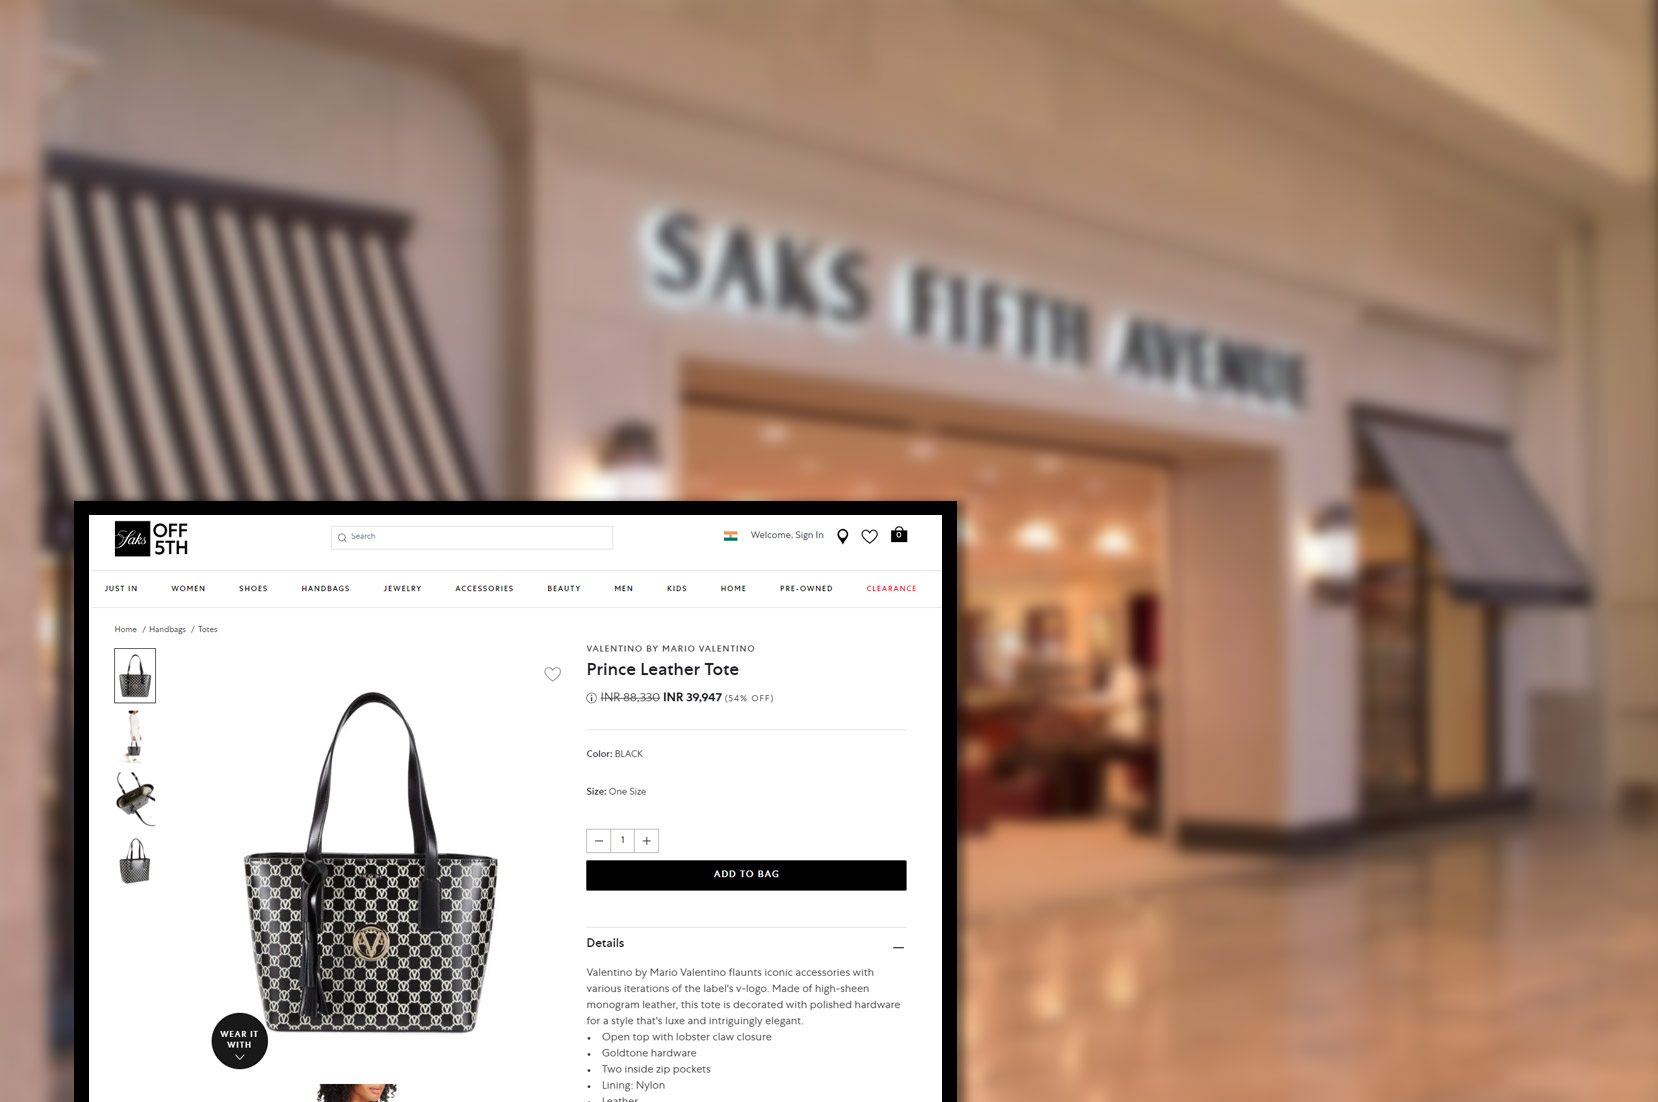 saksfifthavenue-comproduct-pricing-information-and-image-scraping-services